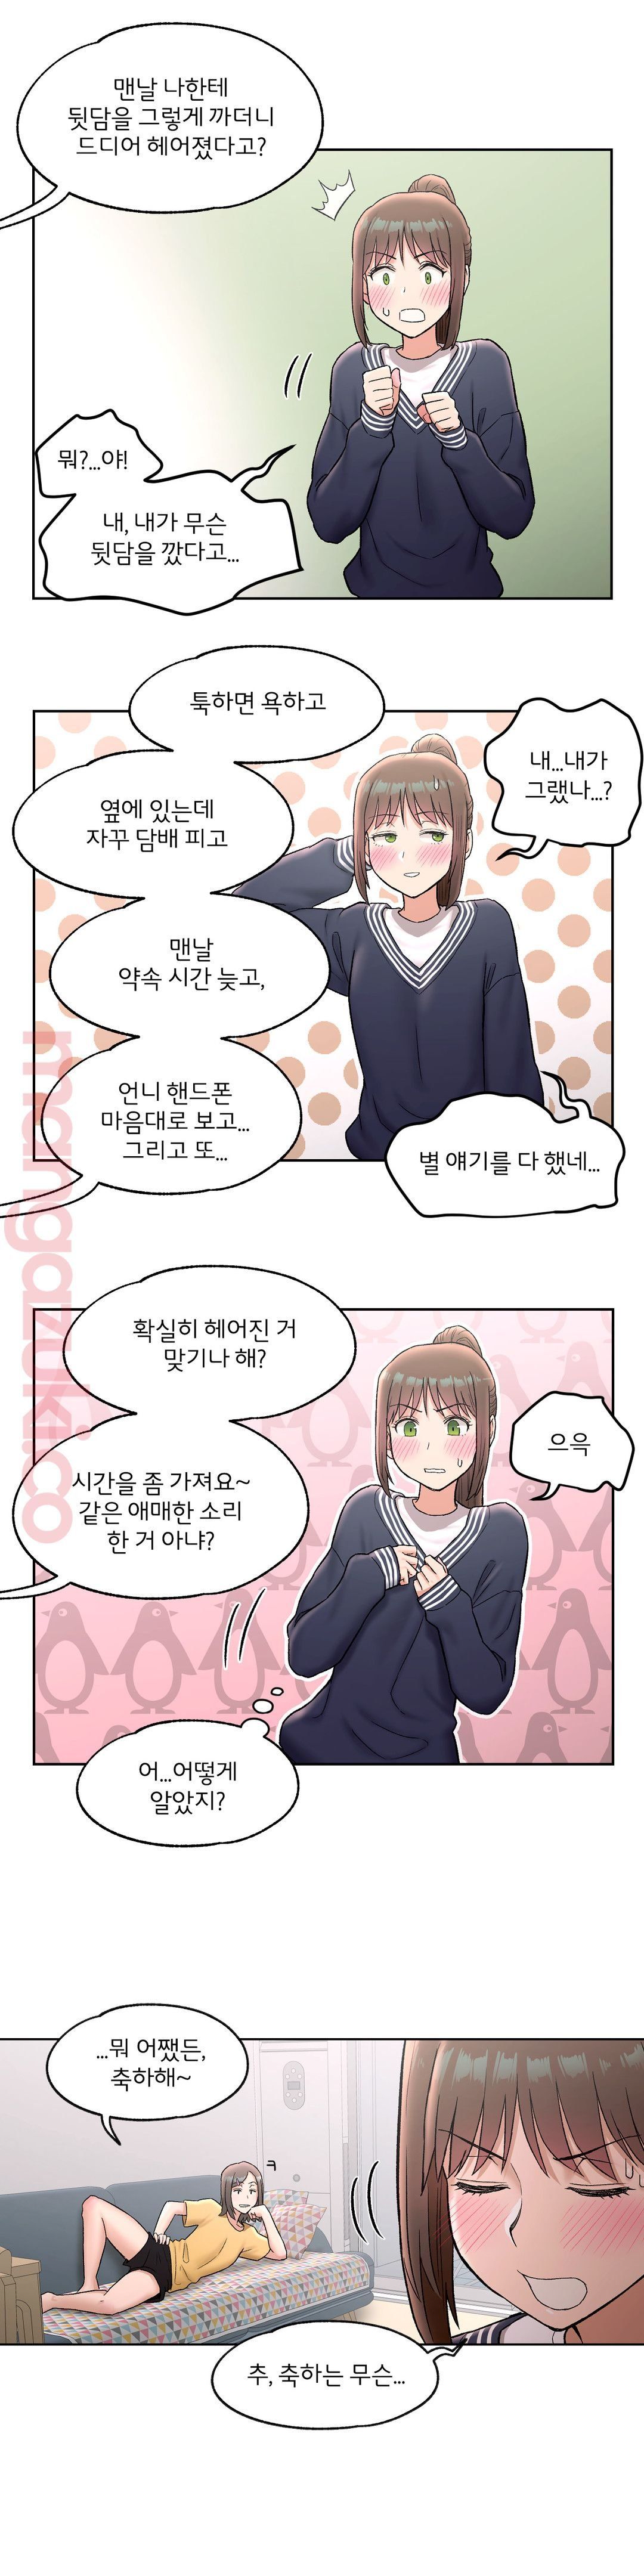 Sexercise Raw - Chapter 53 Page 3